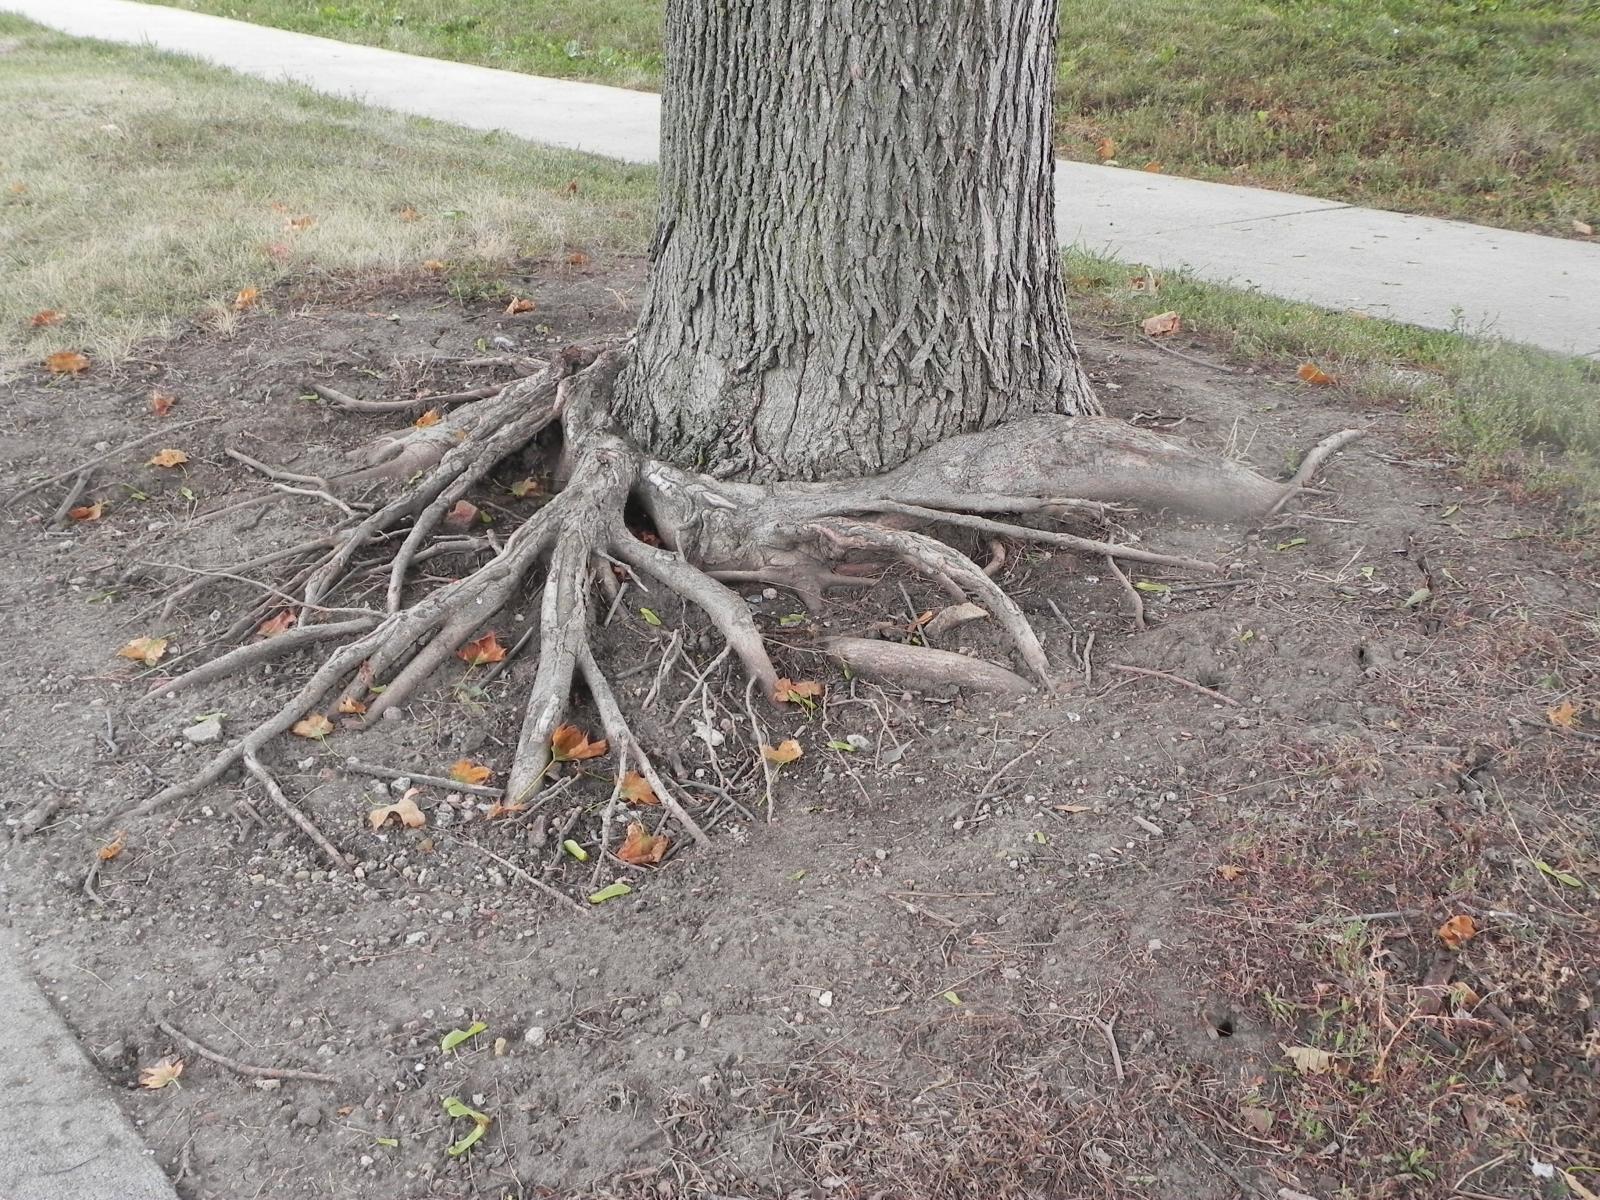 Example of a tree with severe stem girdling roots.